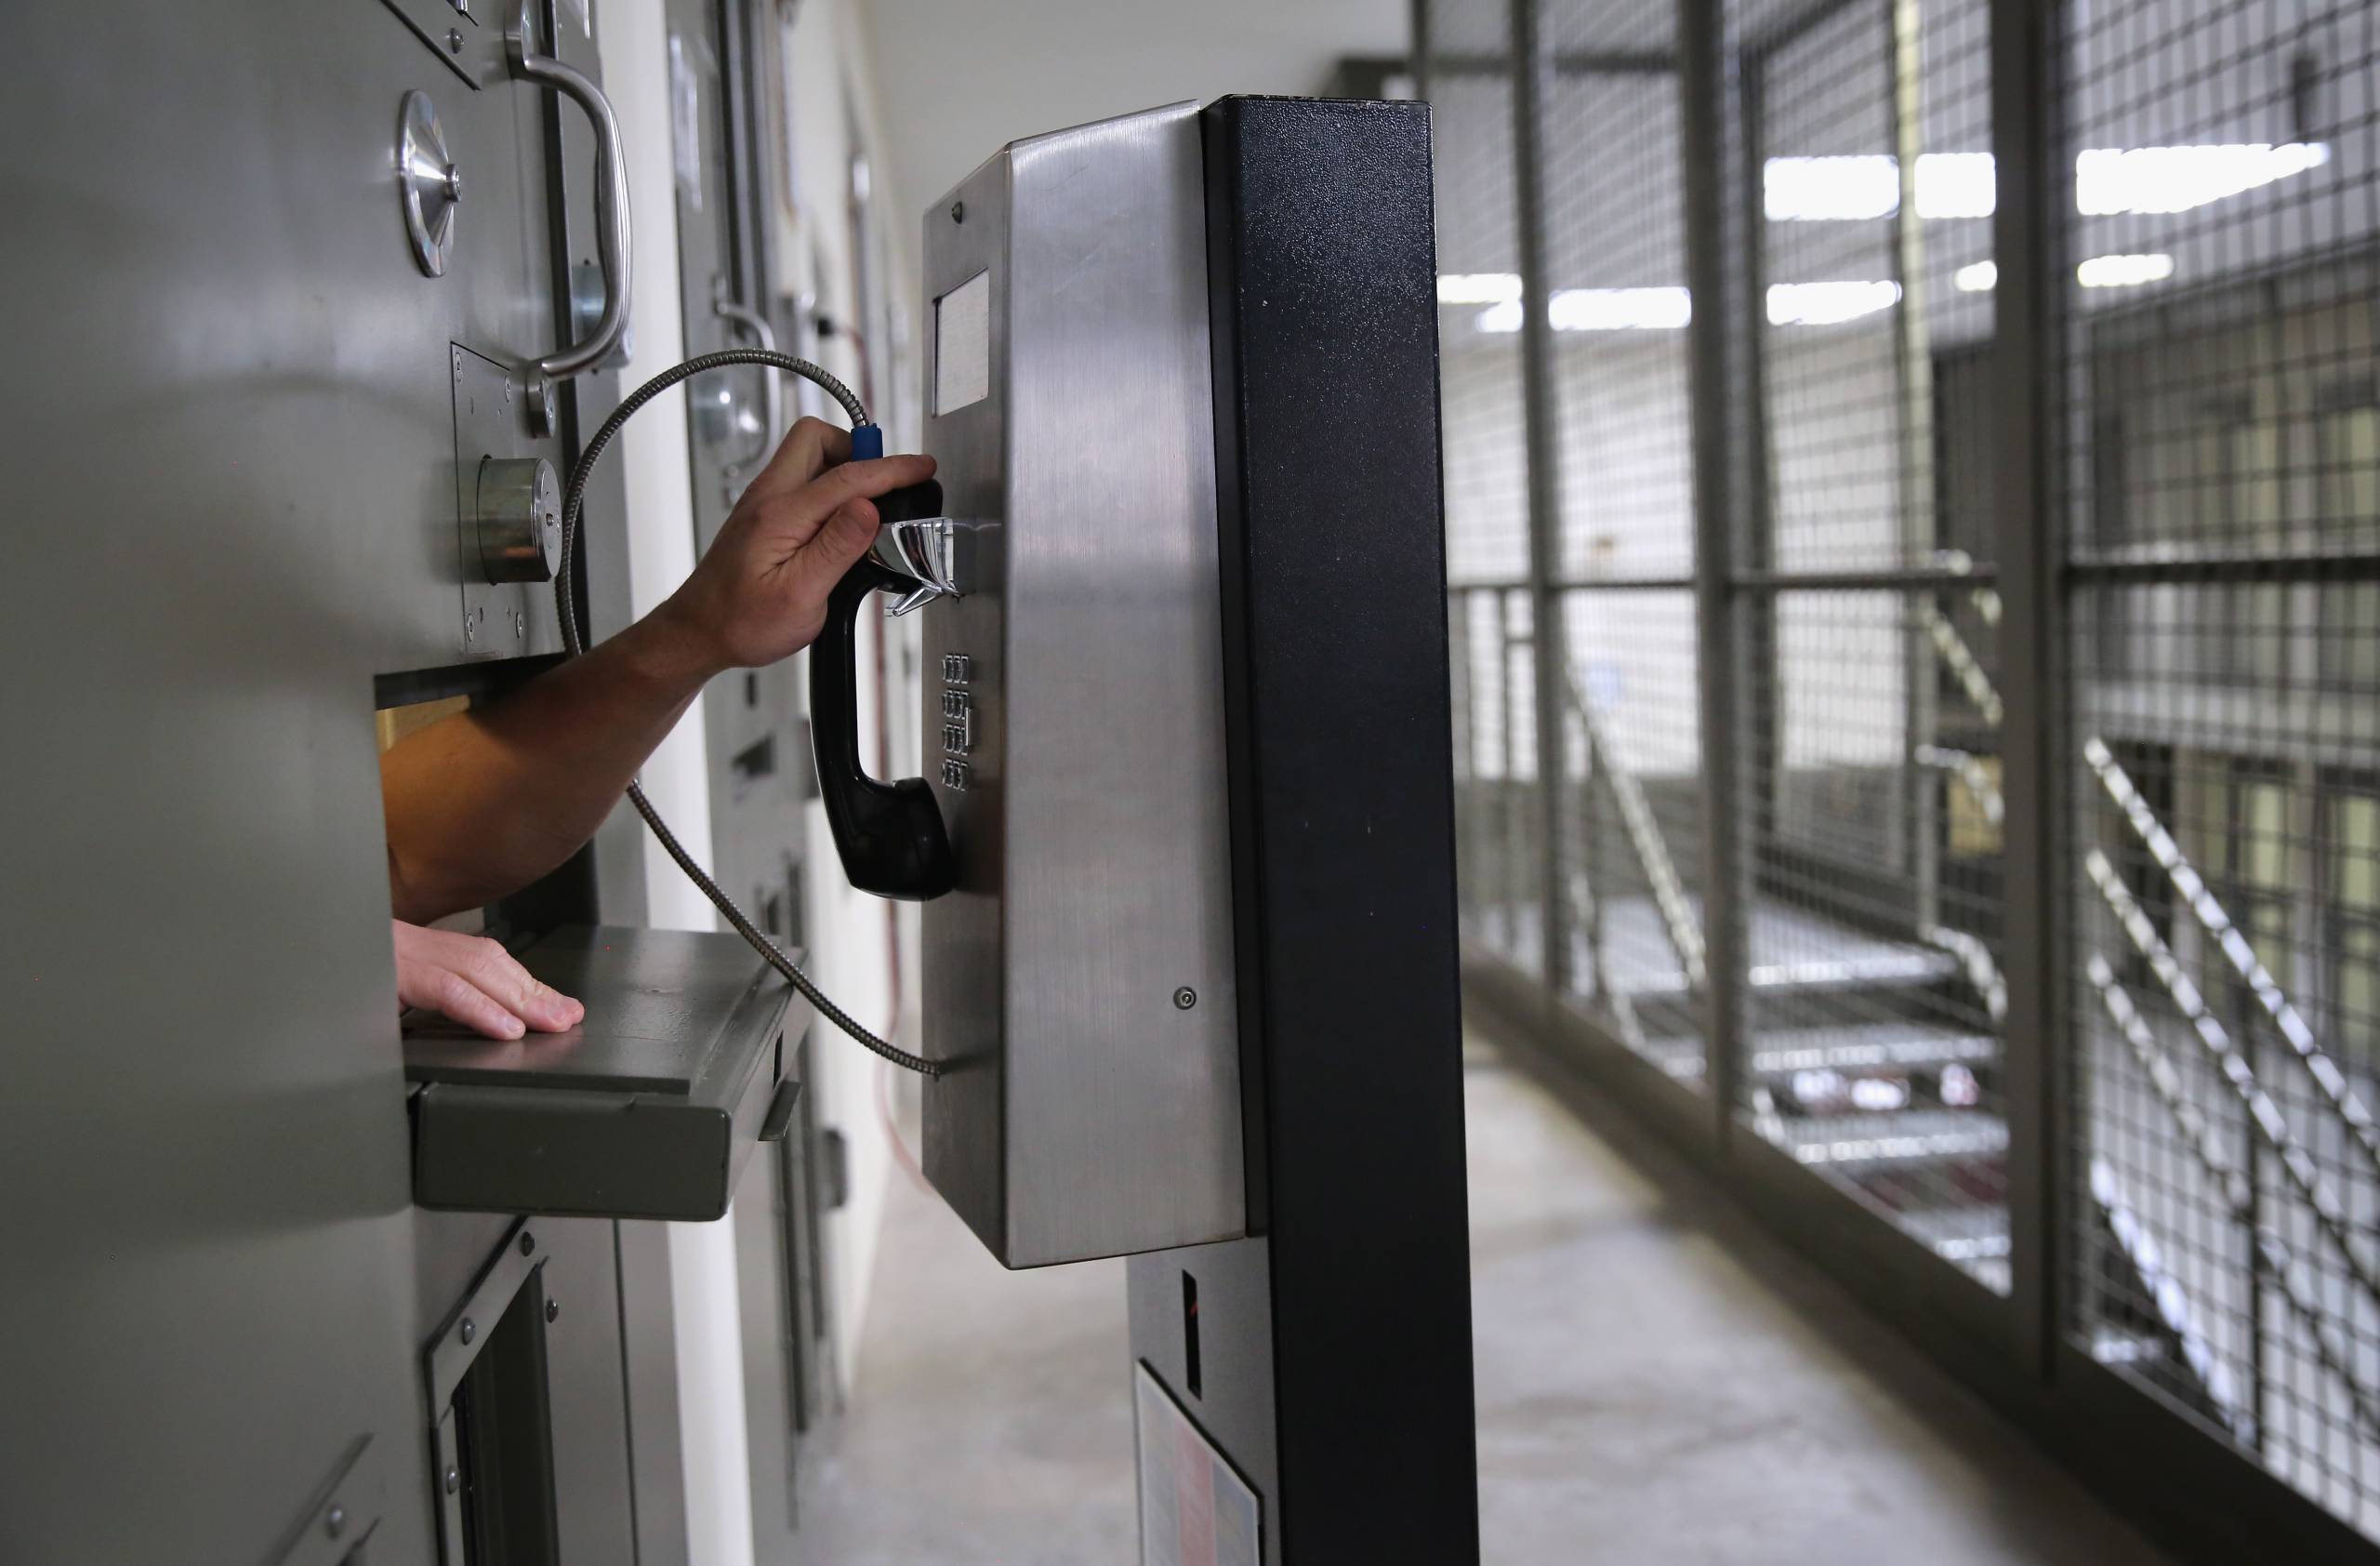 reaching out of a cell to use a payphone in a detention center